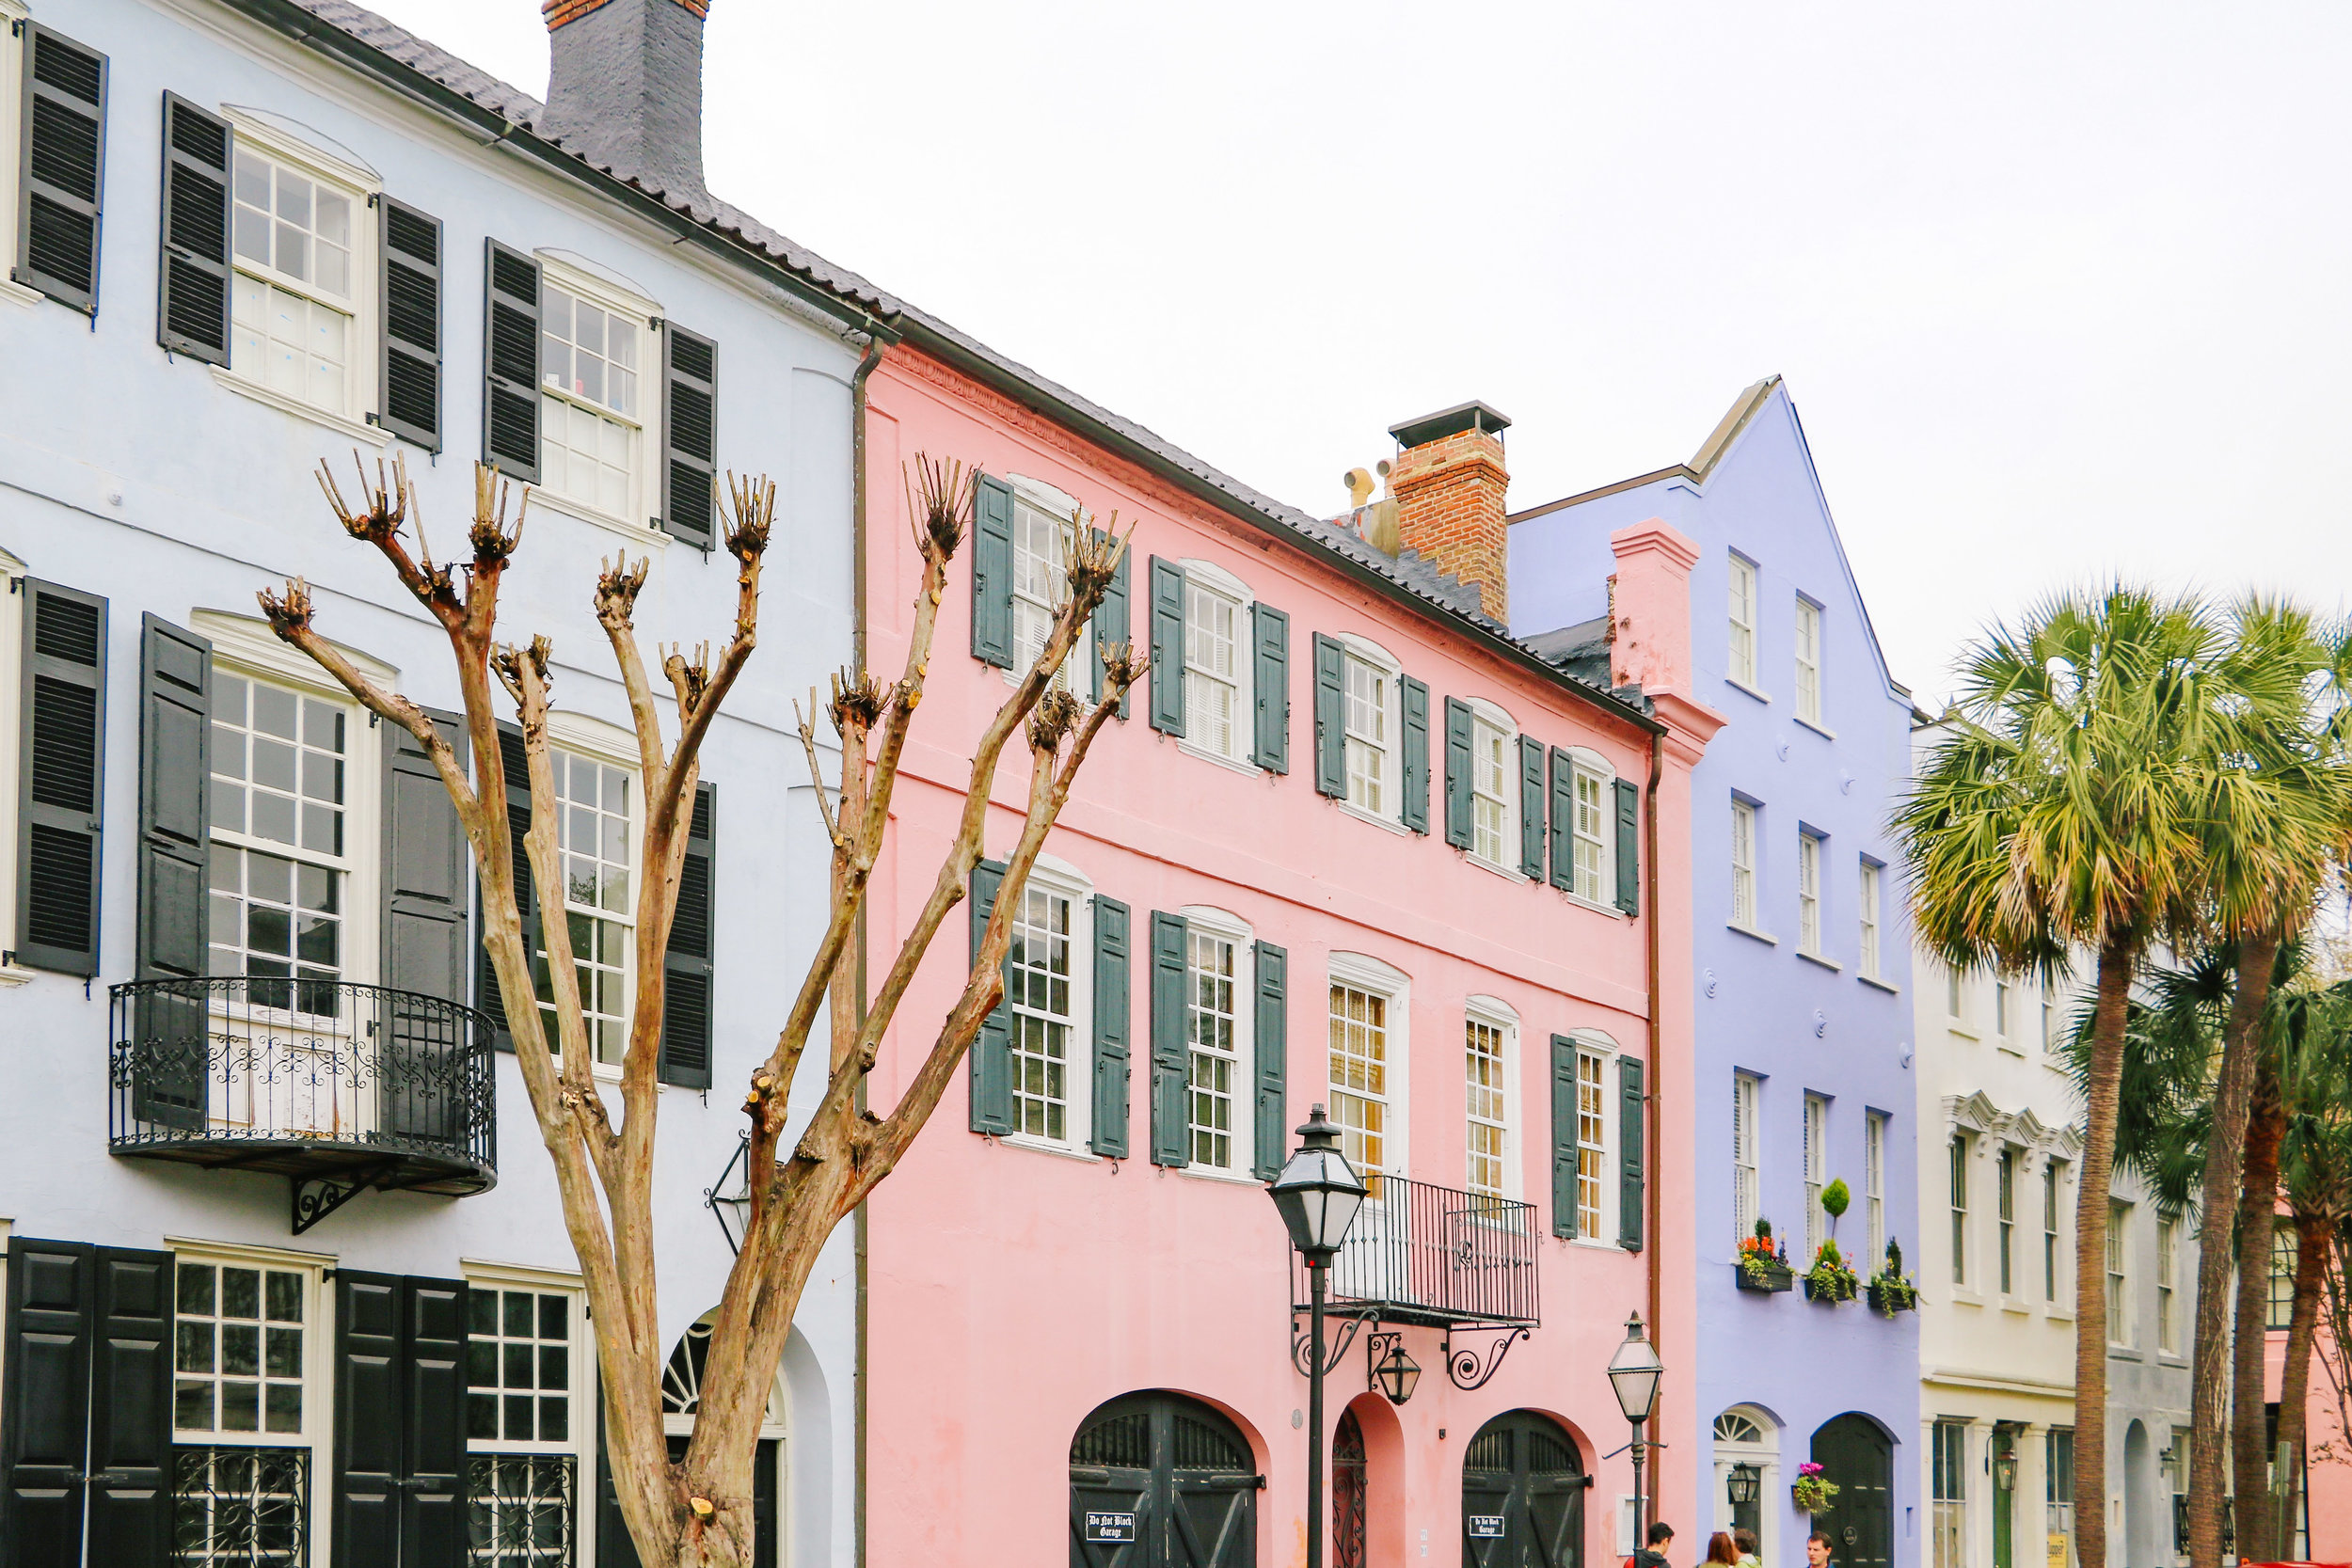 Must-See Streets in Charleston - by Courtney Brown